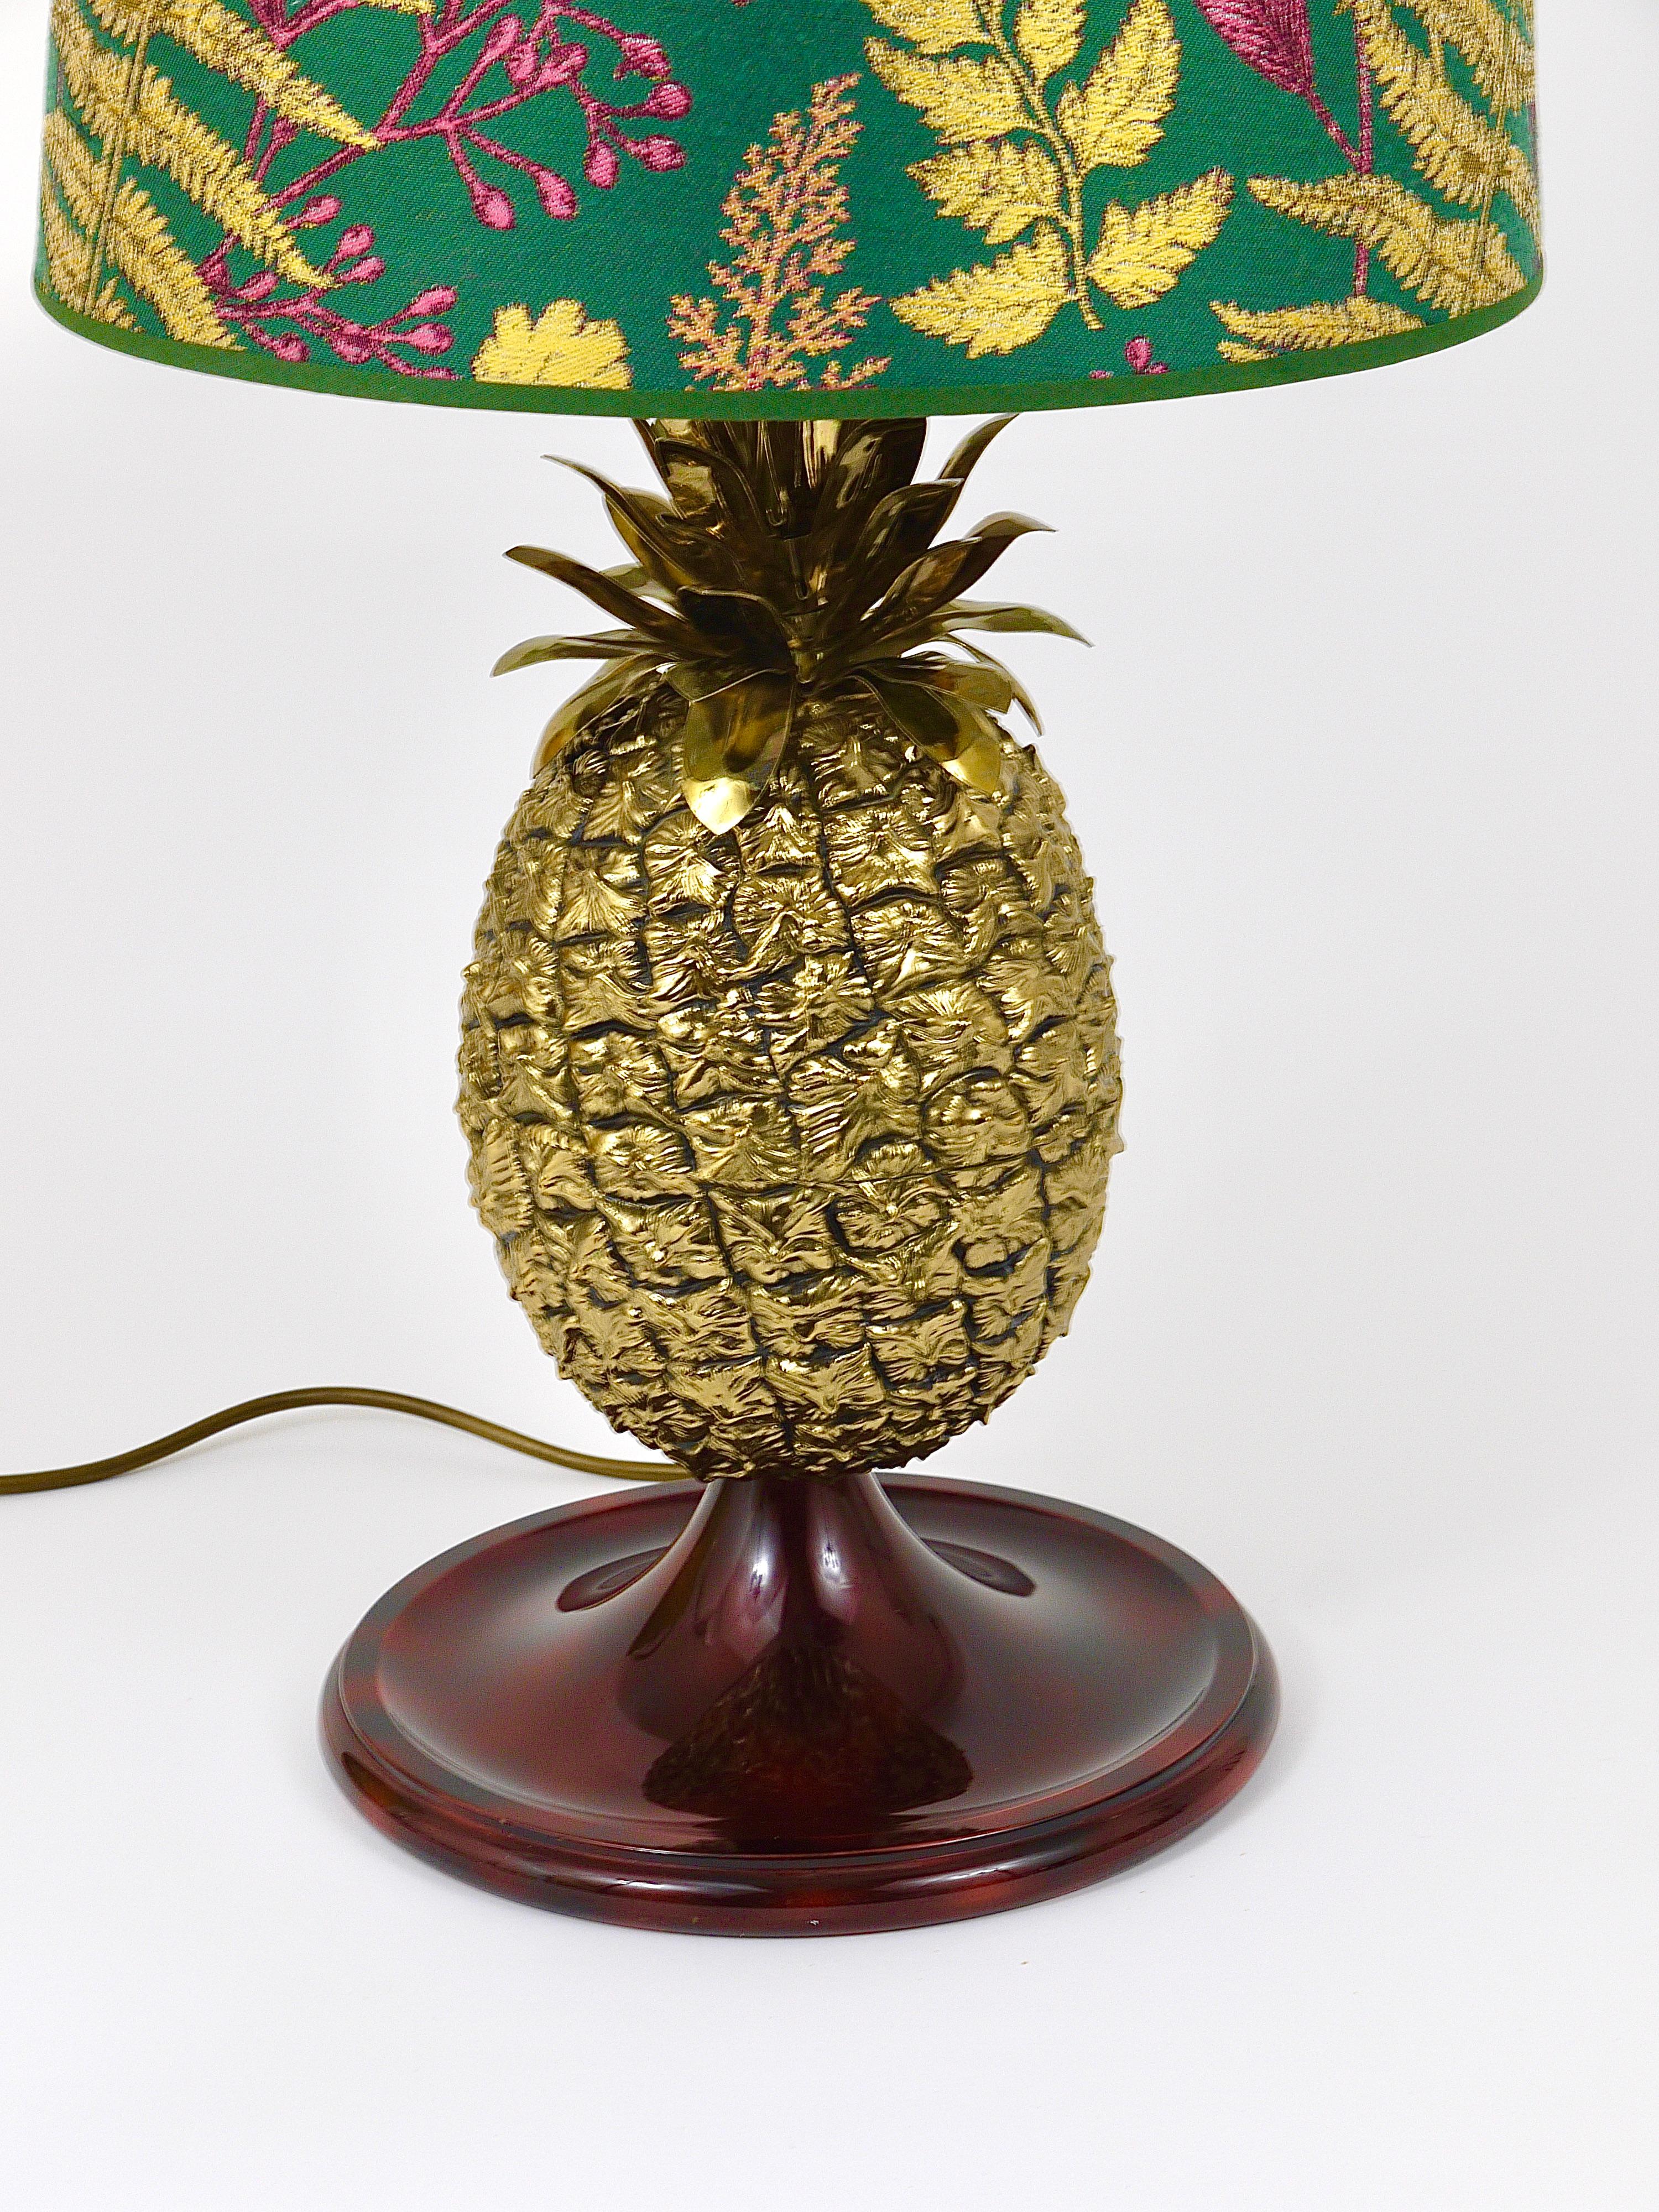 20th Century Mauro Manetti Hollywood Regency Pineapple Brass Table Lamp, Italy, 1970s For Sale